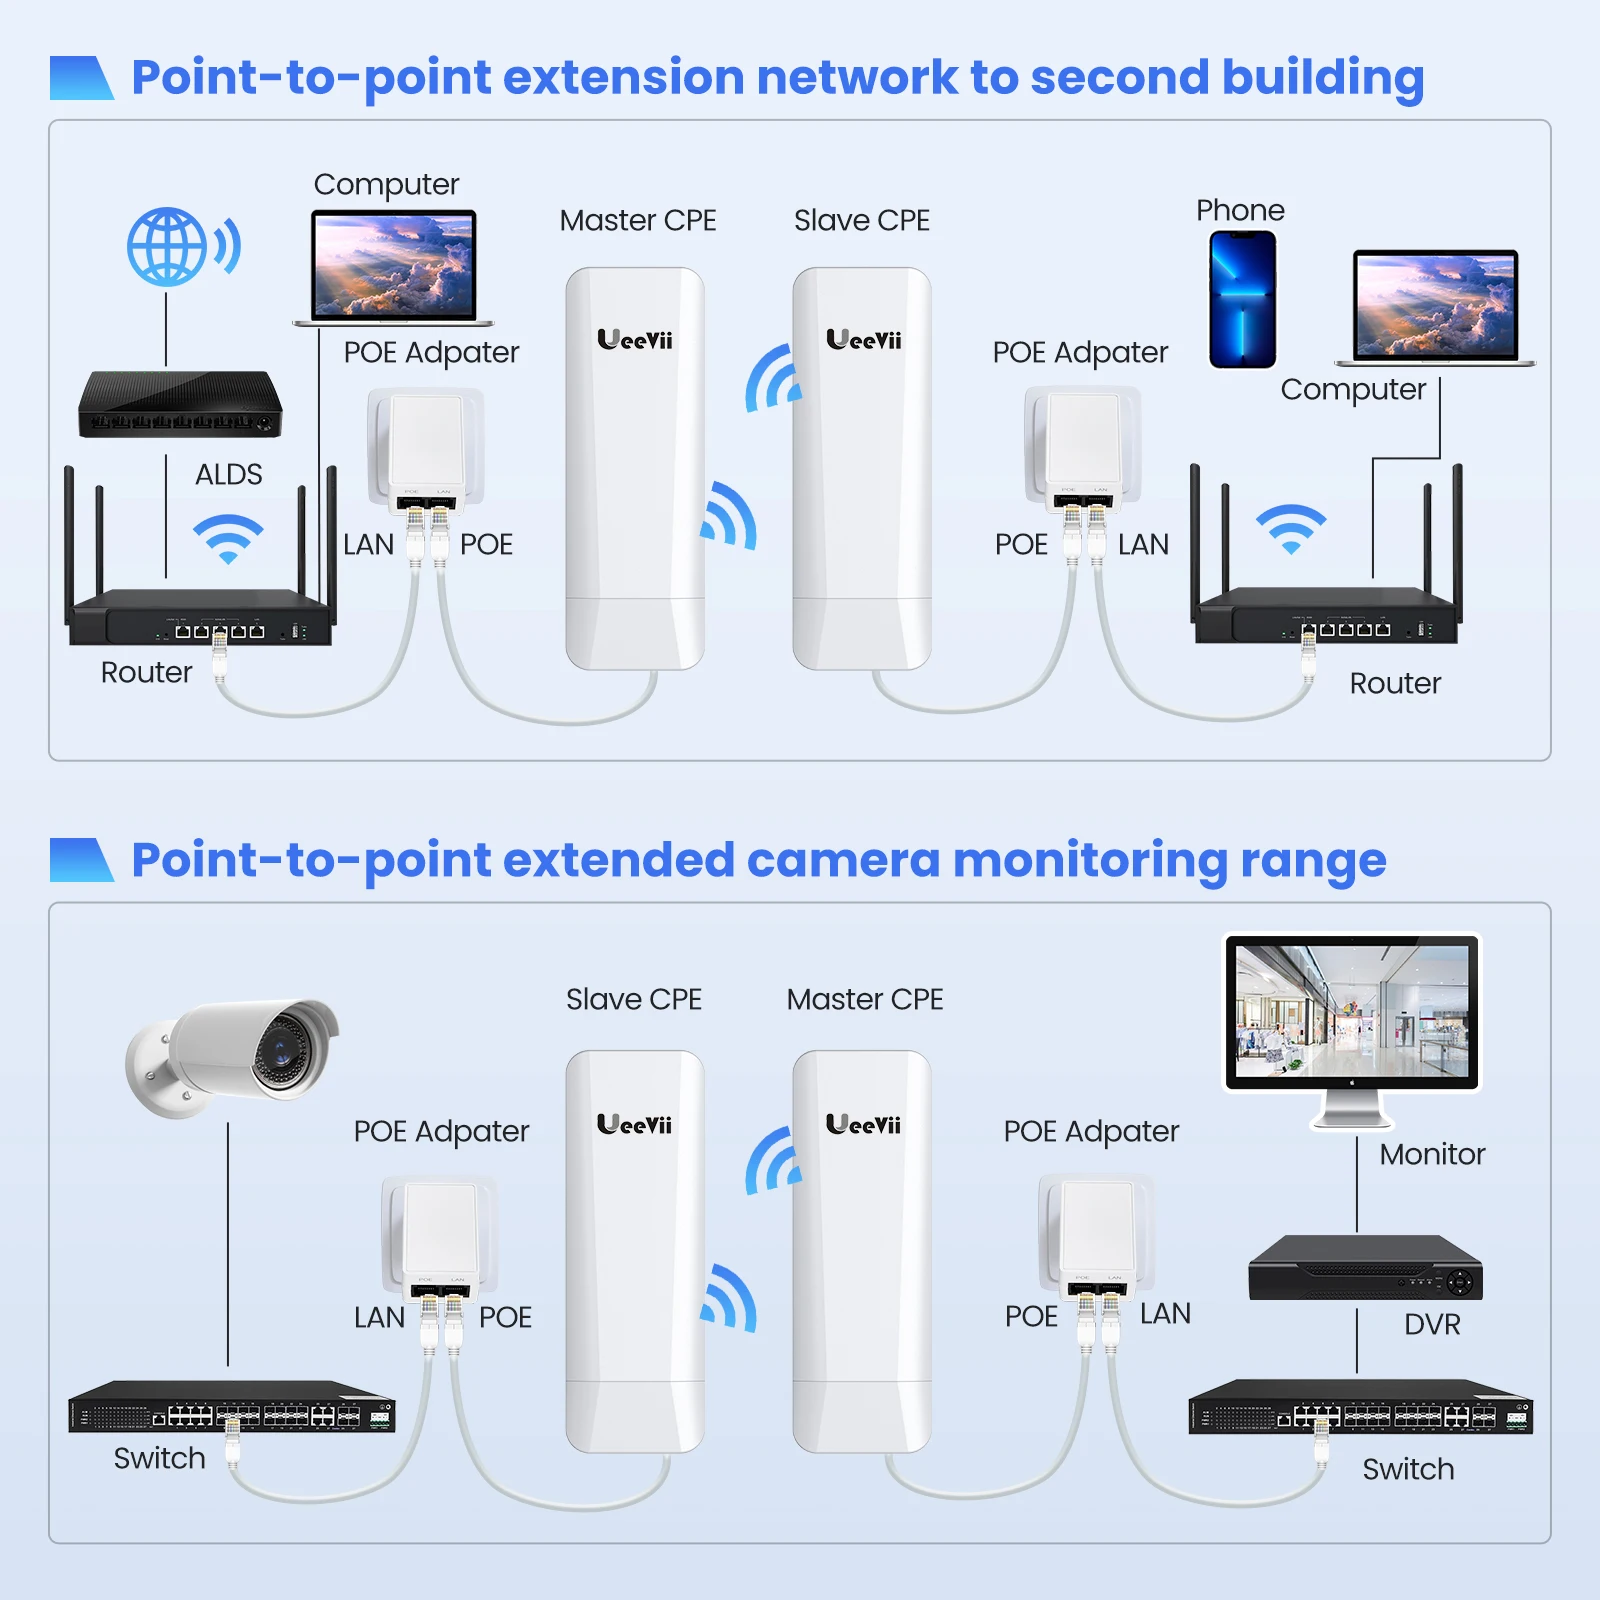 UeeVii CPE453 Wireless Wifi Repeater CPE Lang Range Extender 300Mbps 5.8Ghz Outdoor AP Router Bridge 3KM Antenna Repeater CPE images - 6